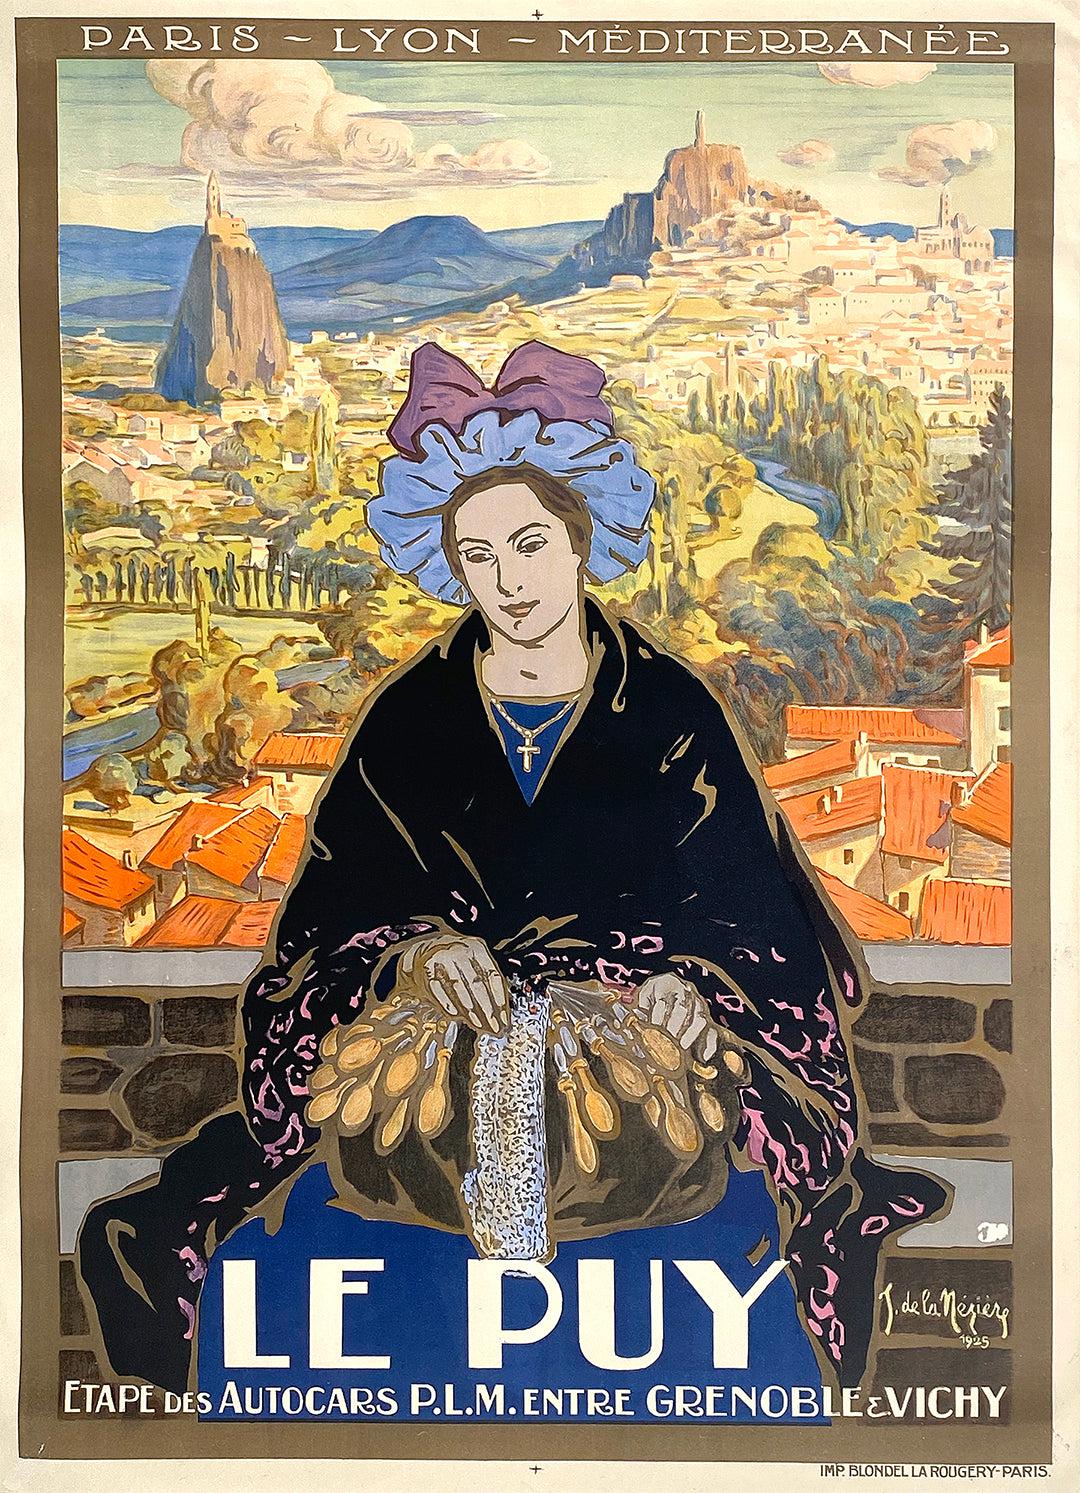 Original Vintage Le Puy French Travel Poster PLM by Neziere 1925